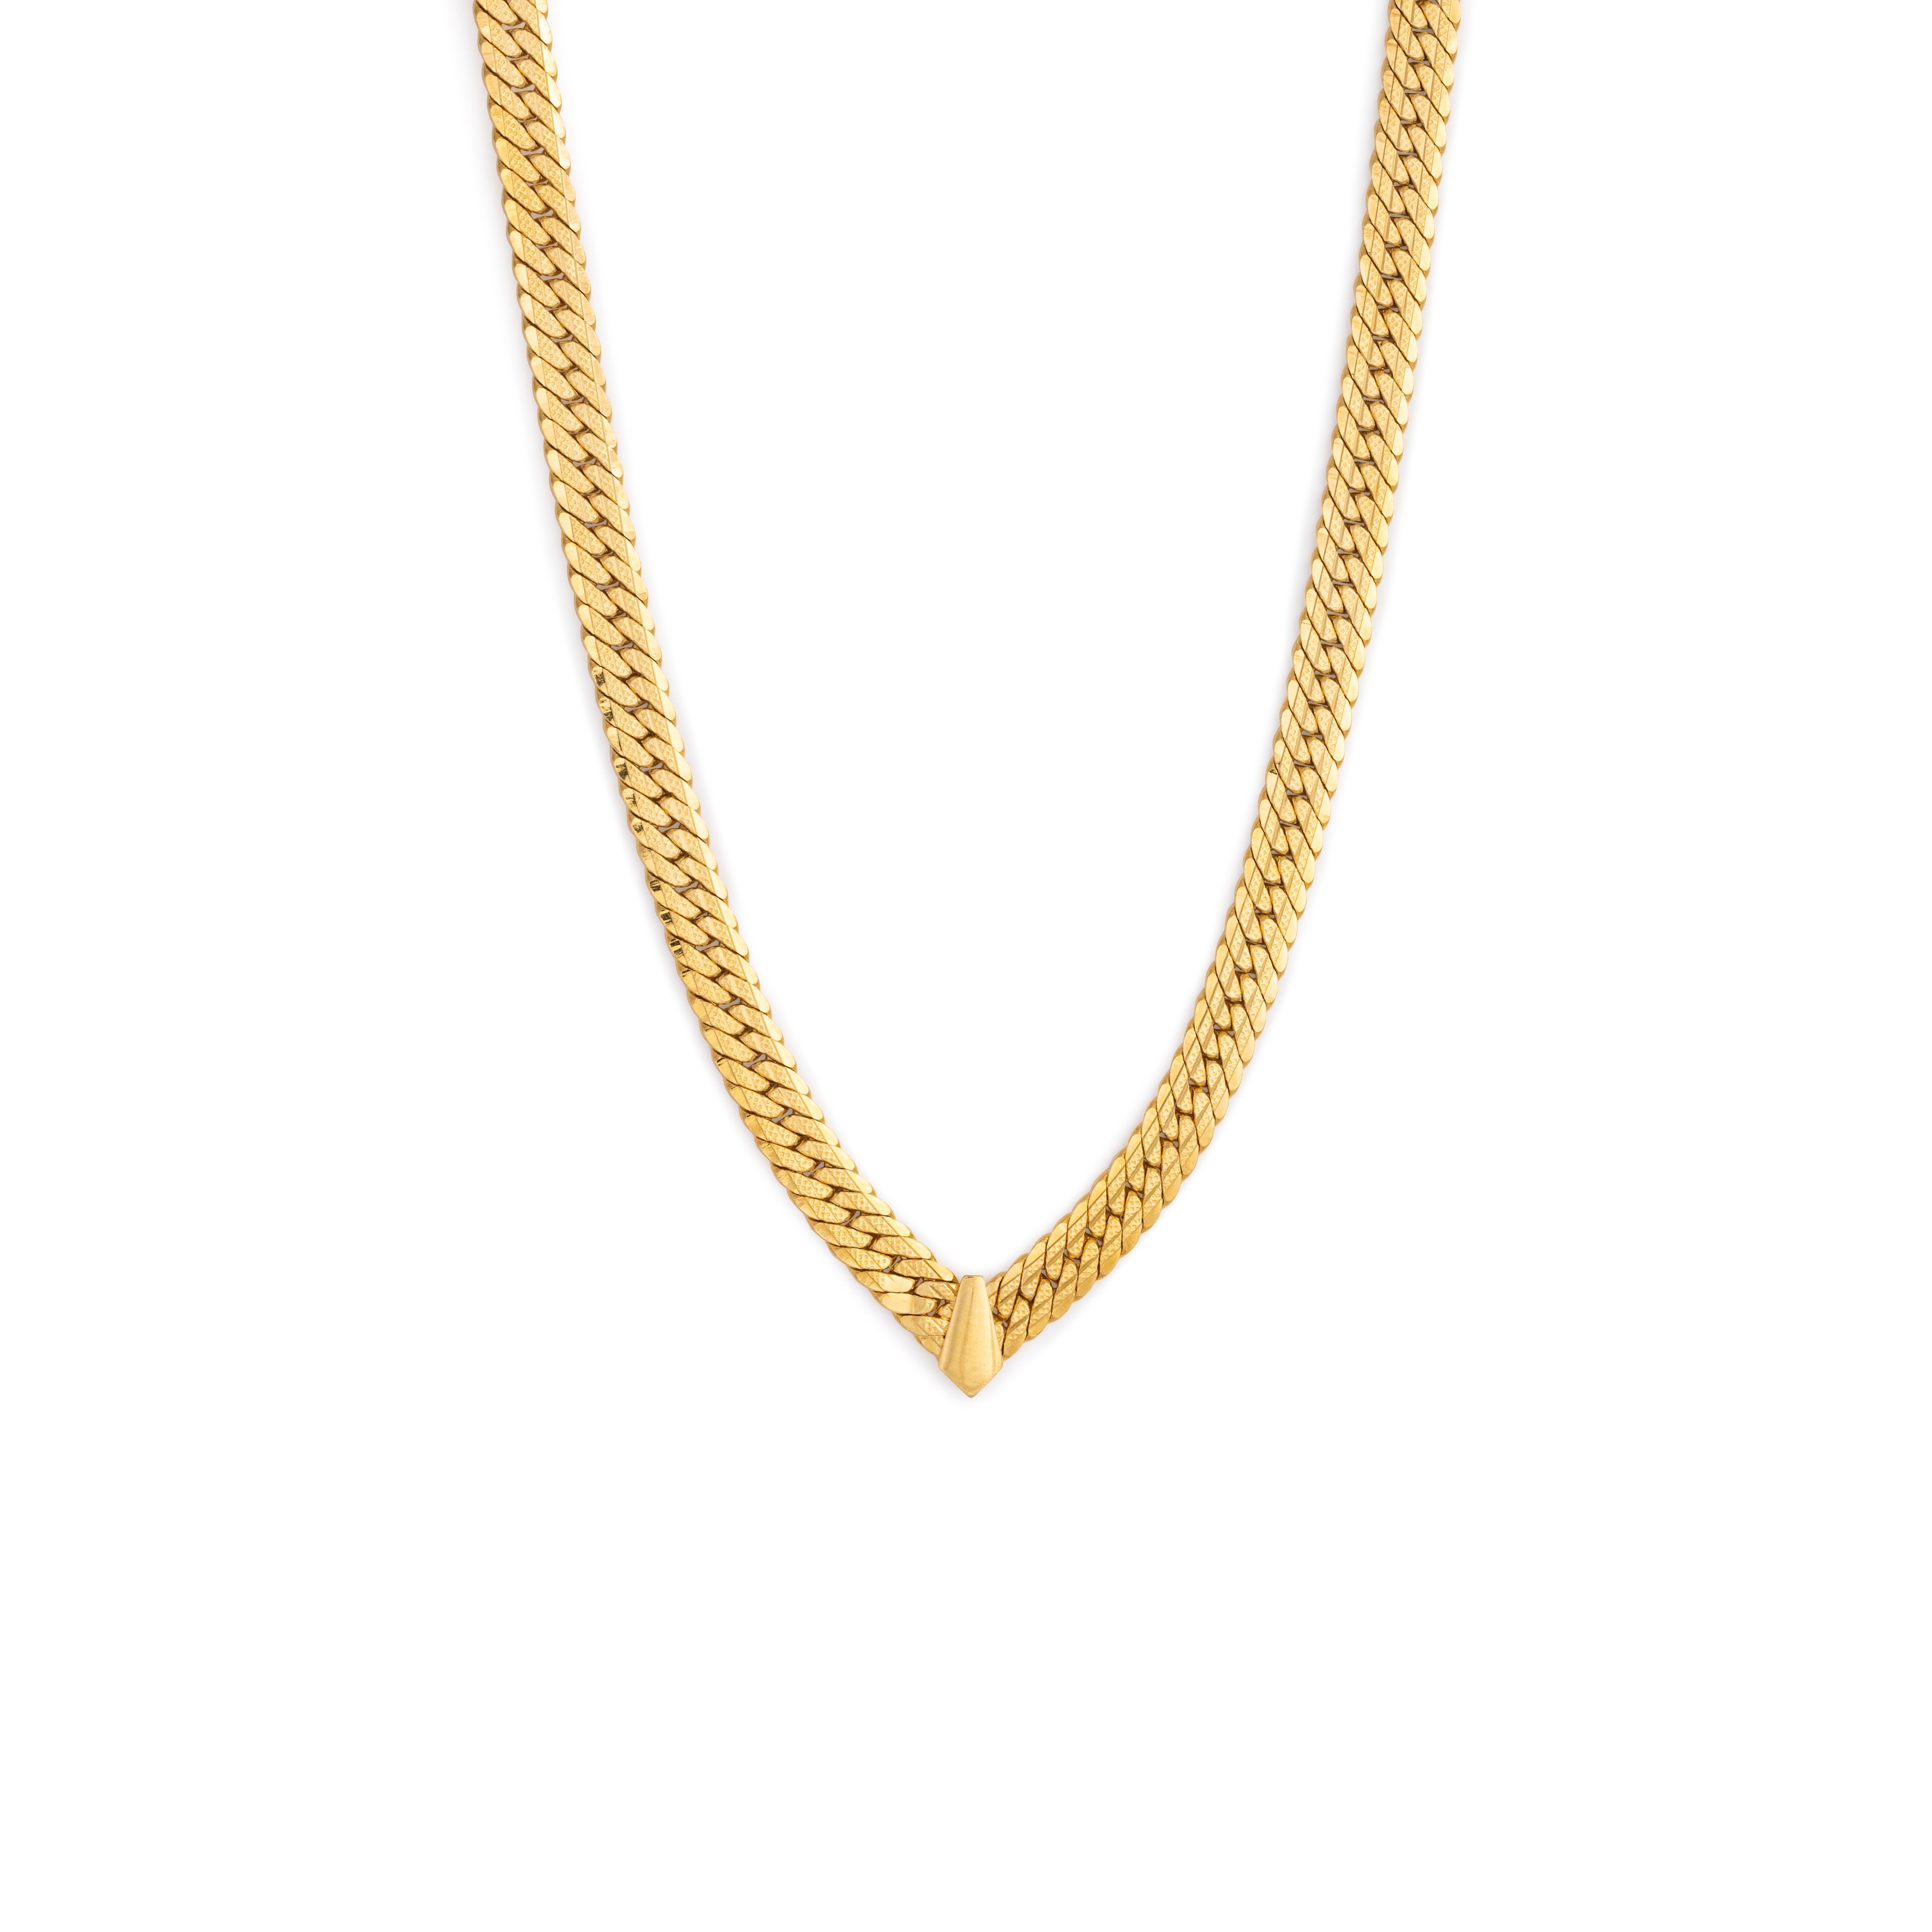 Thick Snake Chain Necklace with a detailed point and fold over clasp closure.